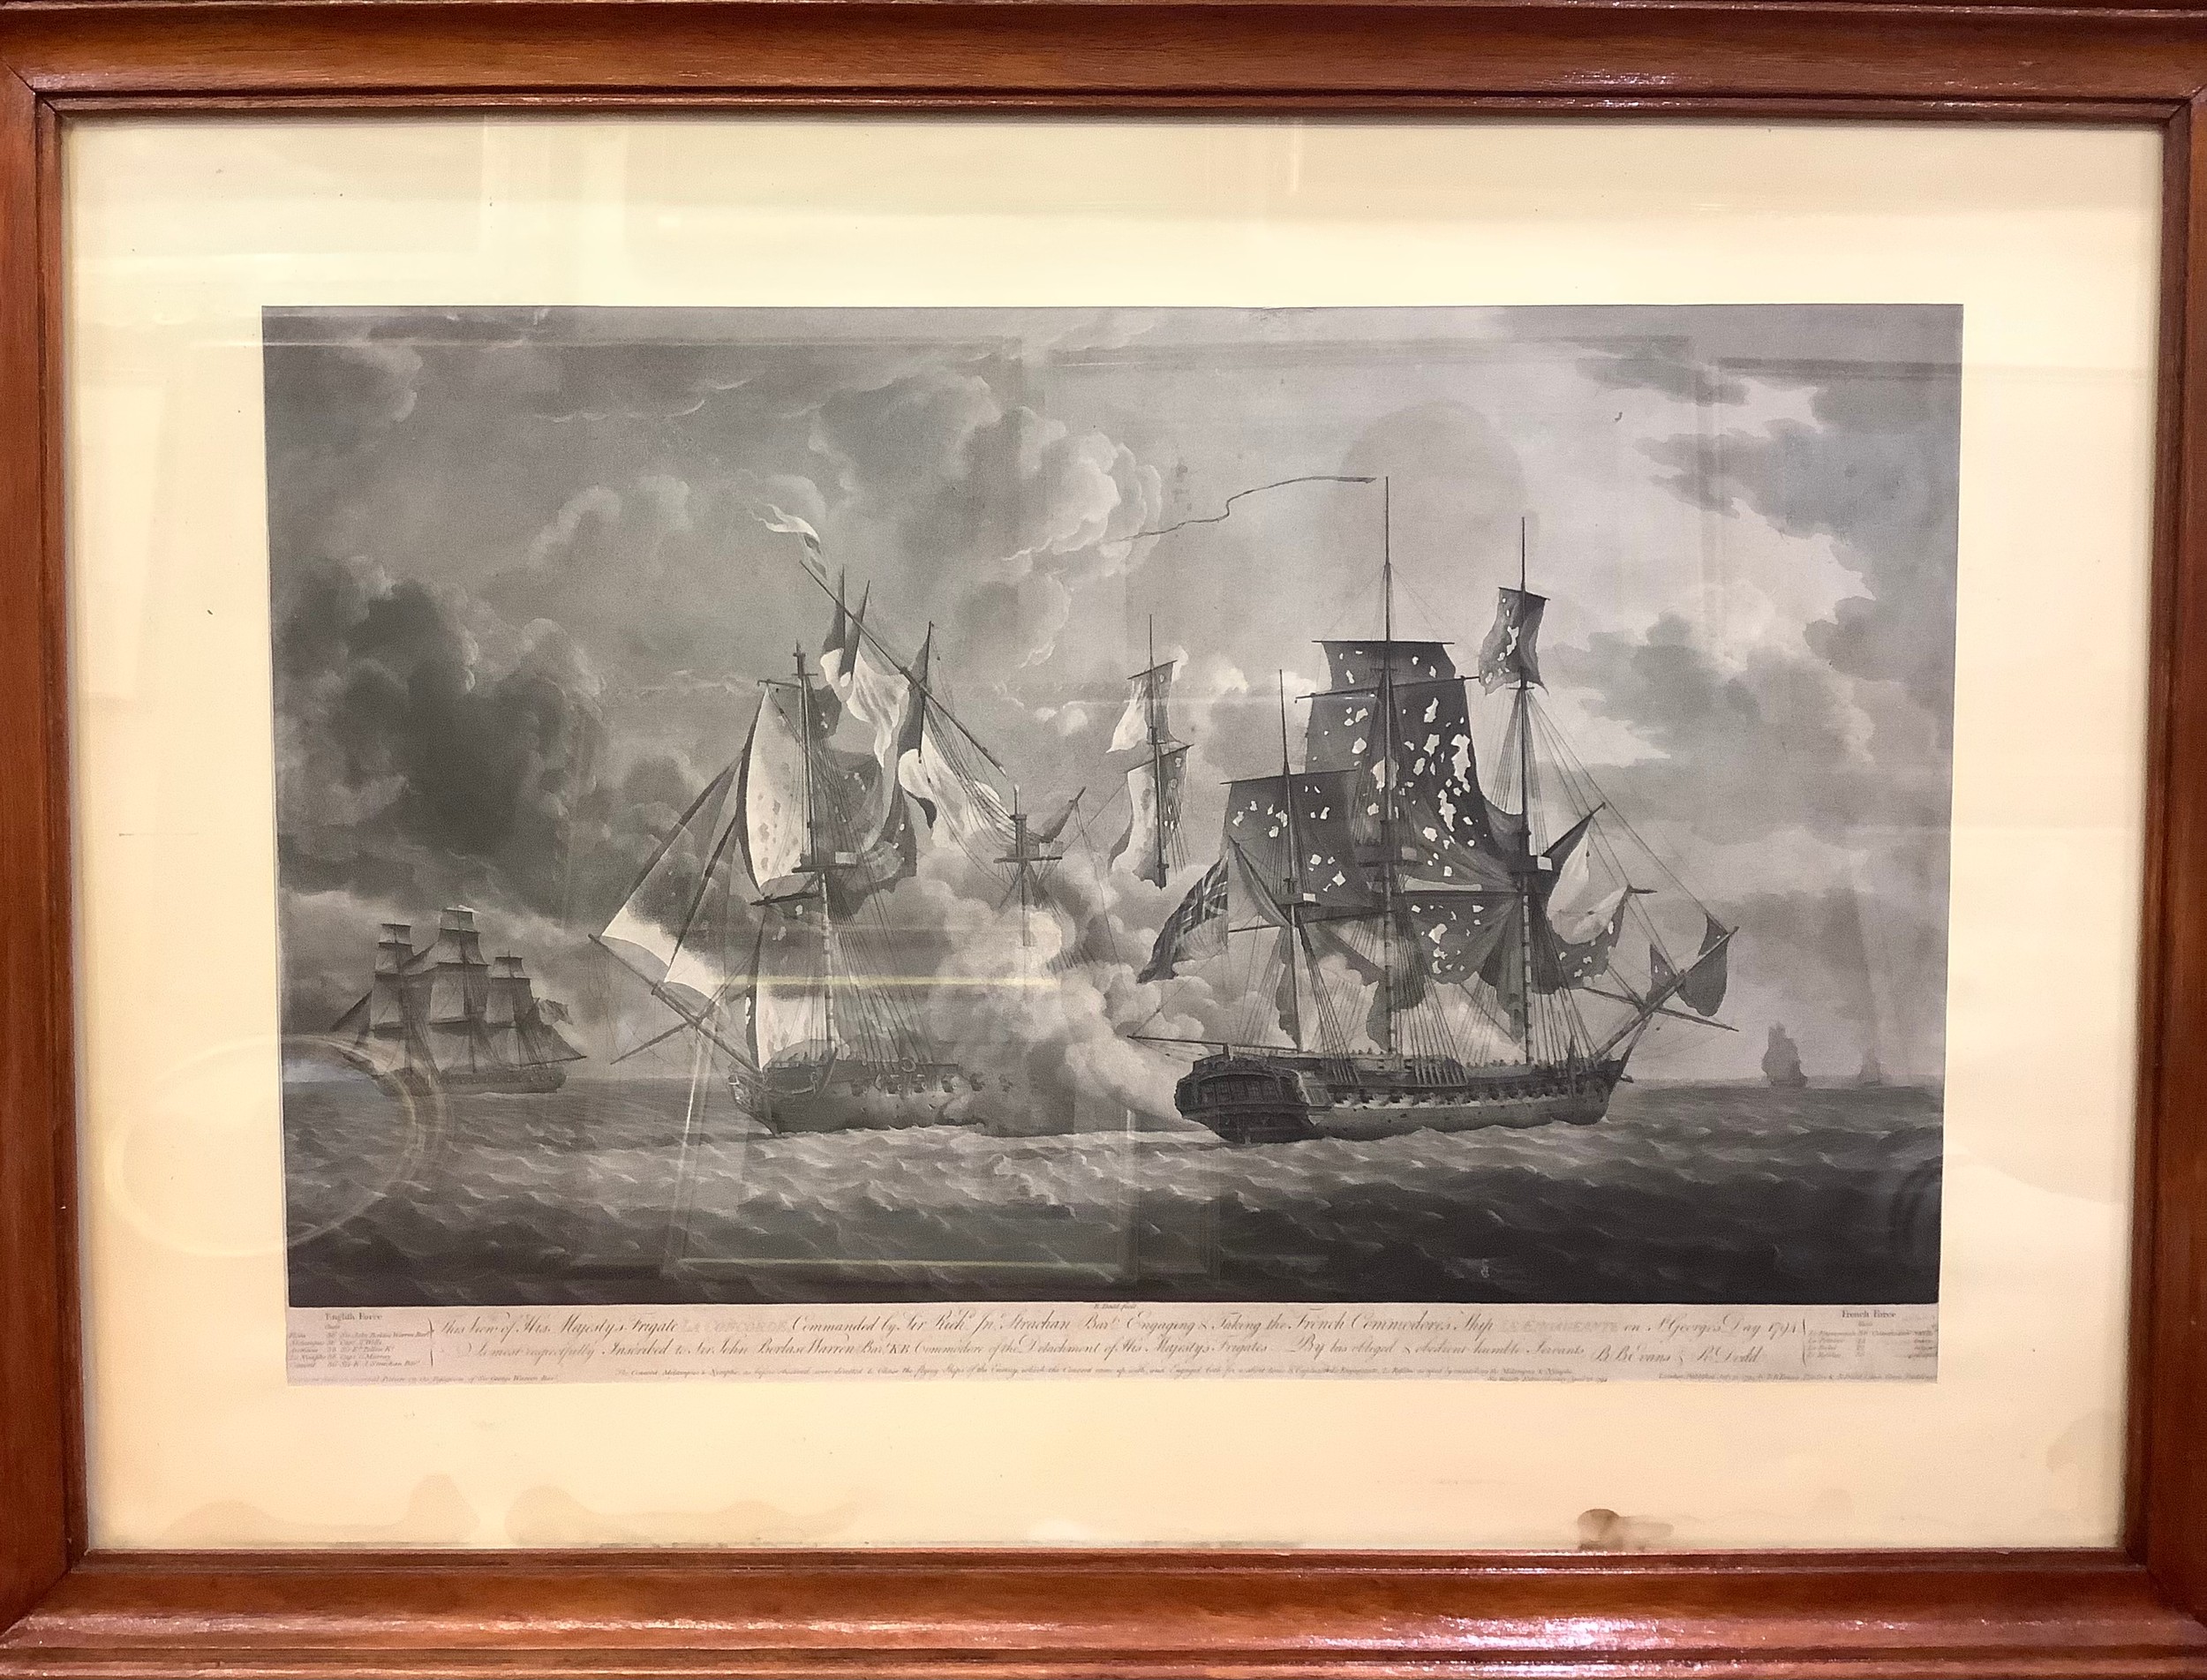 Two monochrome engravings, 'A memorable Engagement of Captn Pearson of the Serapis with Paul Jones - Image 2 of 3